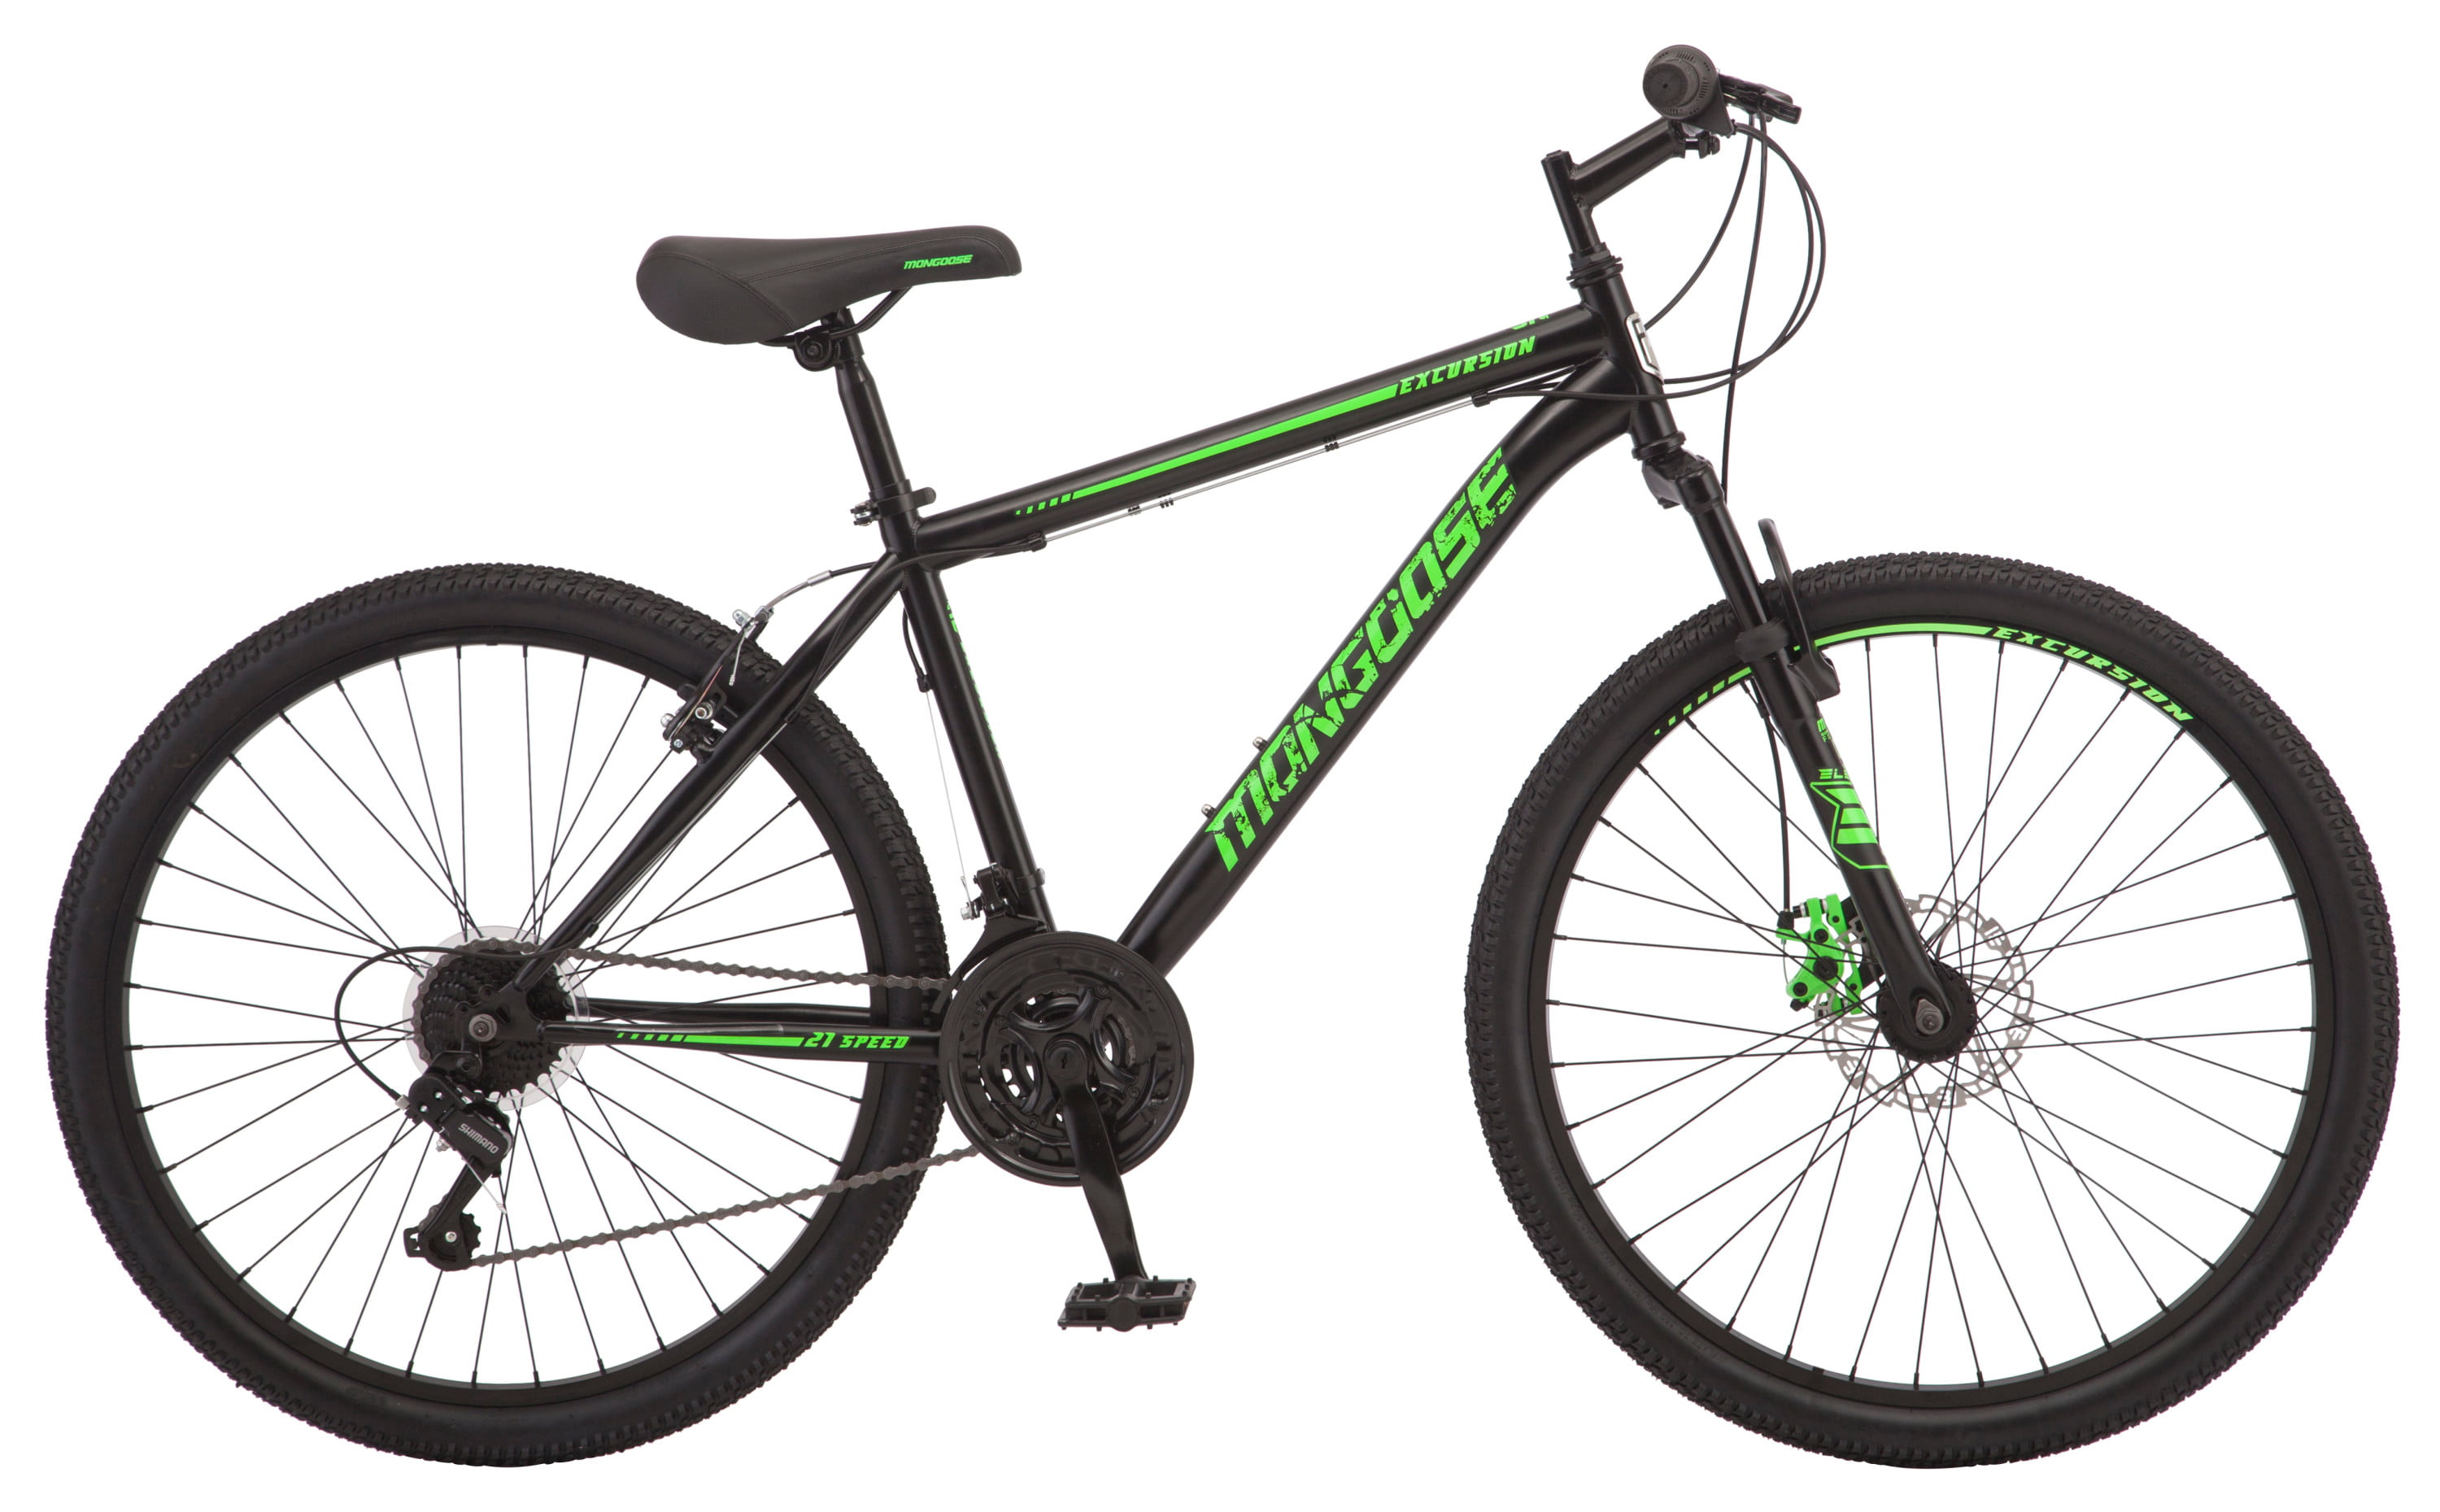 Details about   26" Excursion Mountain Bike 21-Speeds Outdoor Fun 24-Inch Wheels Boy's Bicycle 